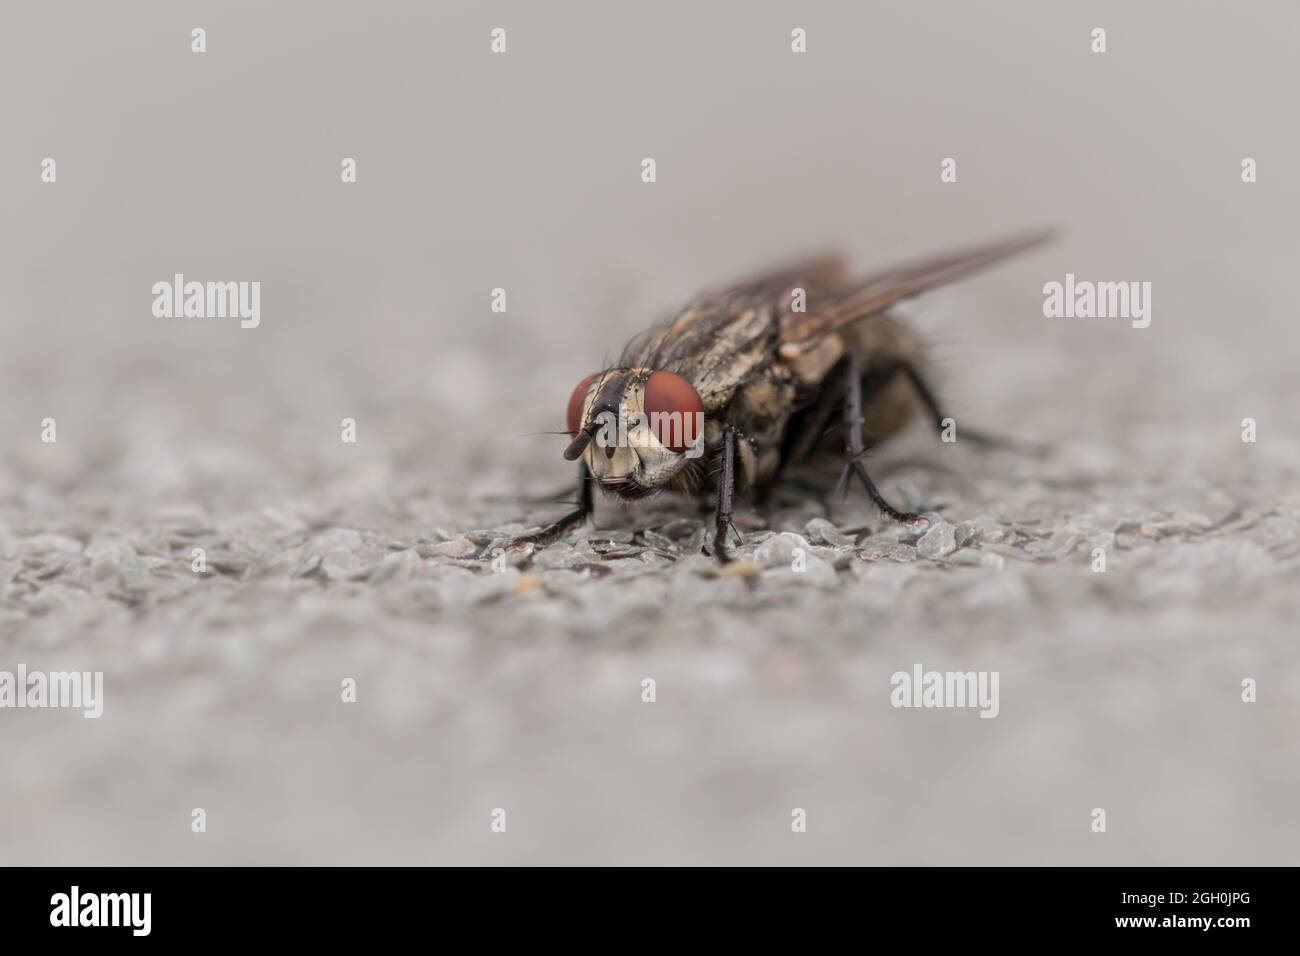 Macro photo of a common flesh fly (Sarcophaga camaria) sitting on a piece of gravel and tarmac roofing in a Newmarket waste ground Stock Photo